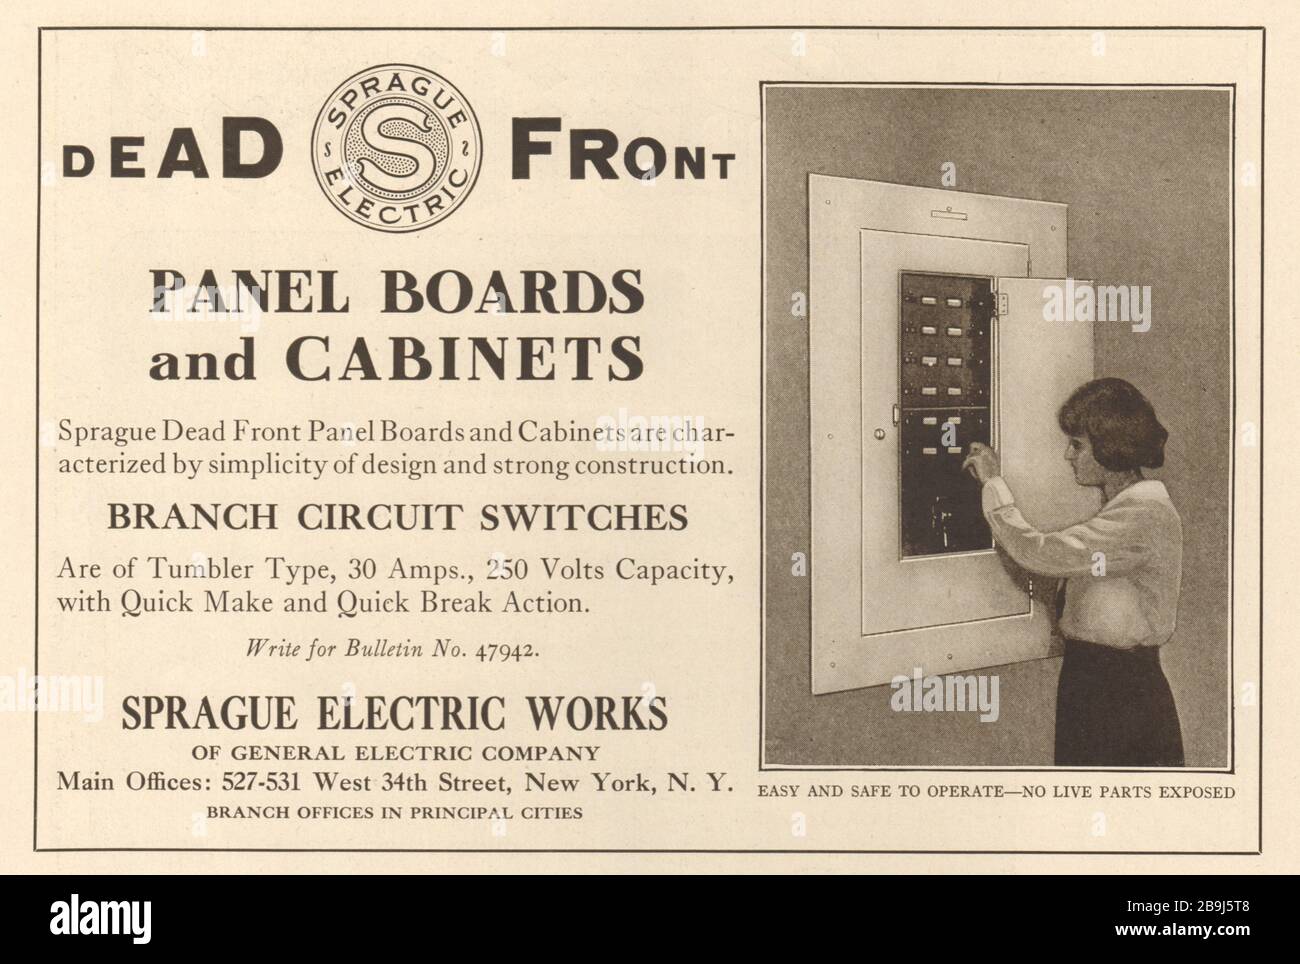 Dead front, panel board, cabinets, branch circuit switches. Sprague Electric Works. General Electric Company 527-531 West 34th Street, New York (1919) Stock Photo